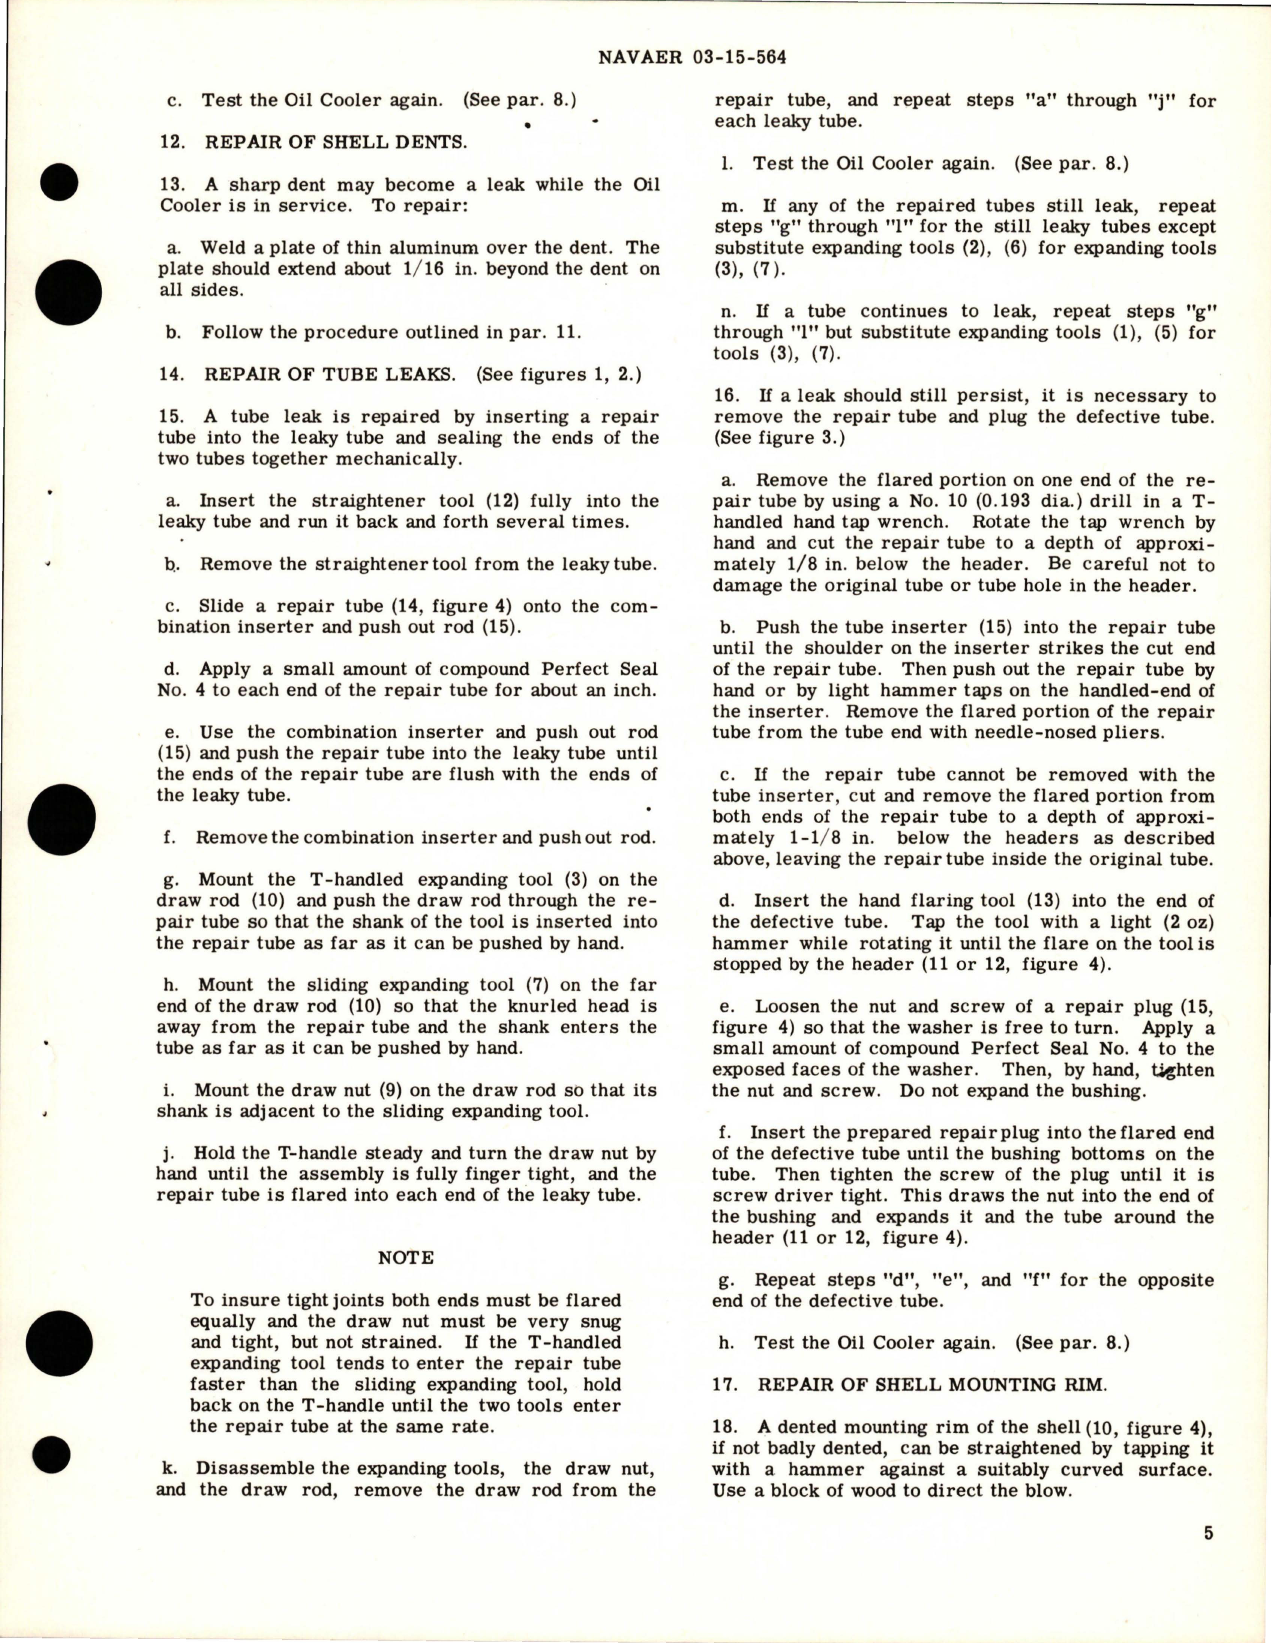 Sample page 5 from AirCorps Library document: Overhaul Instructions with Parts Breakdown for Oil Cooler - Part 72139 